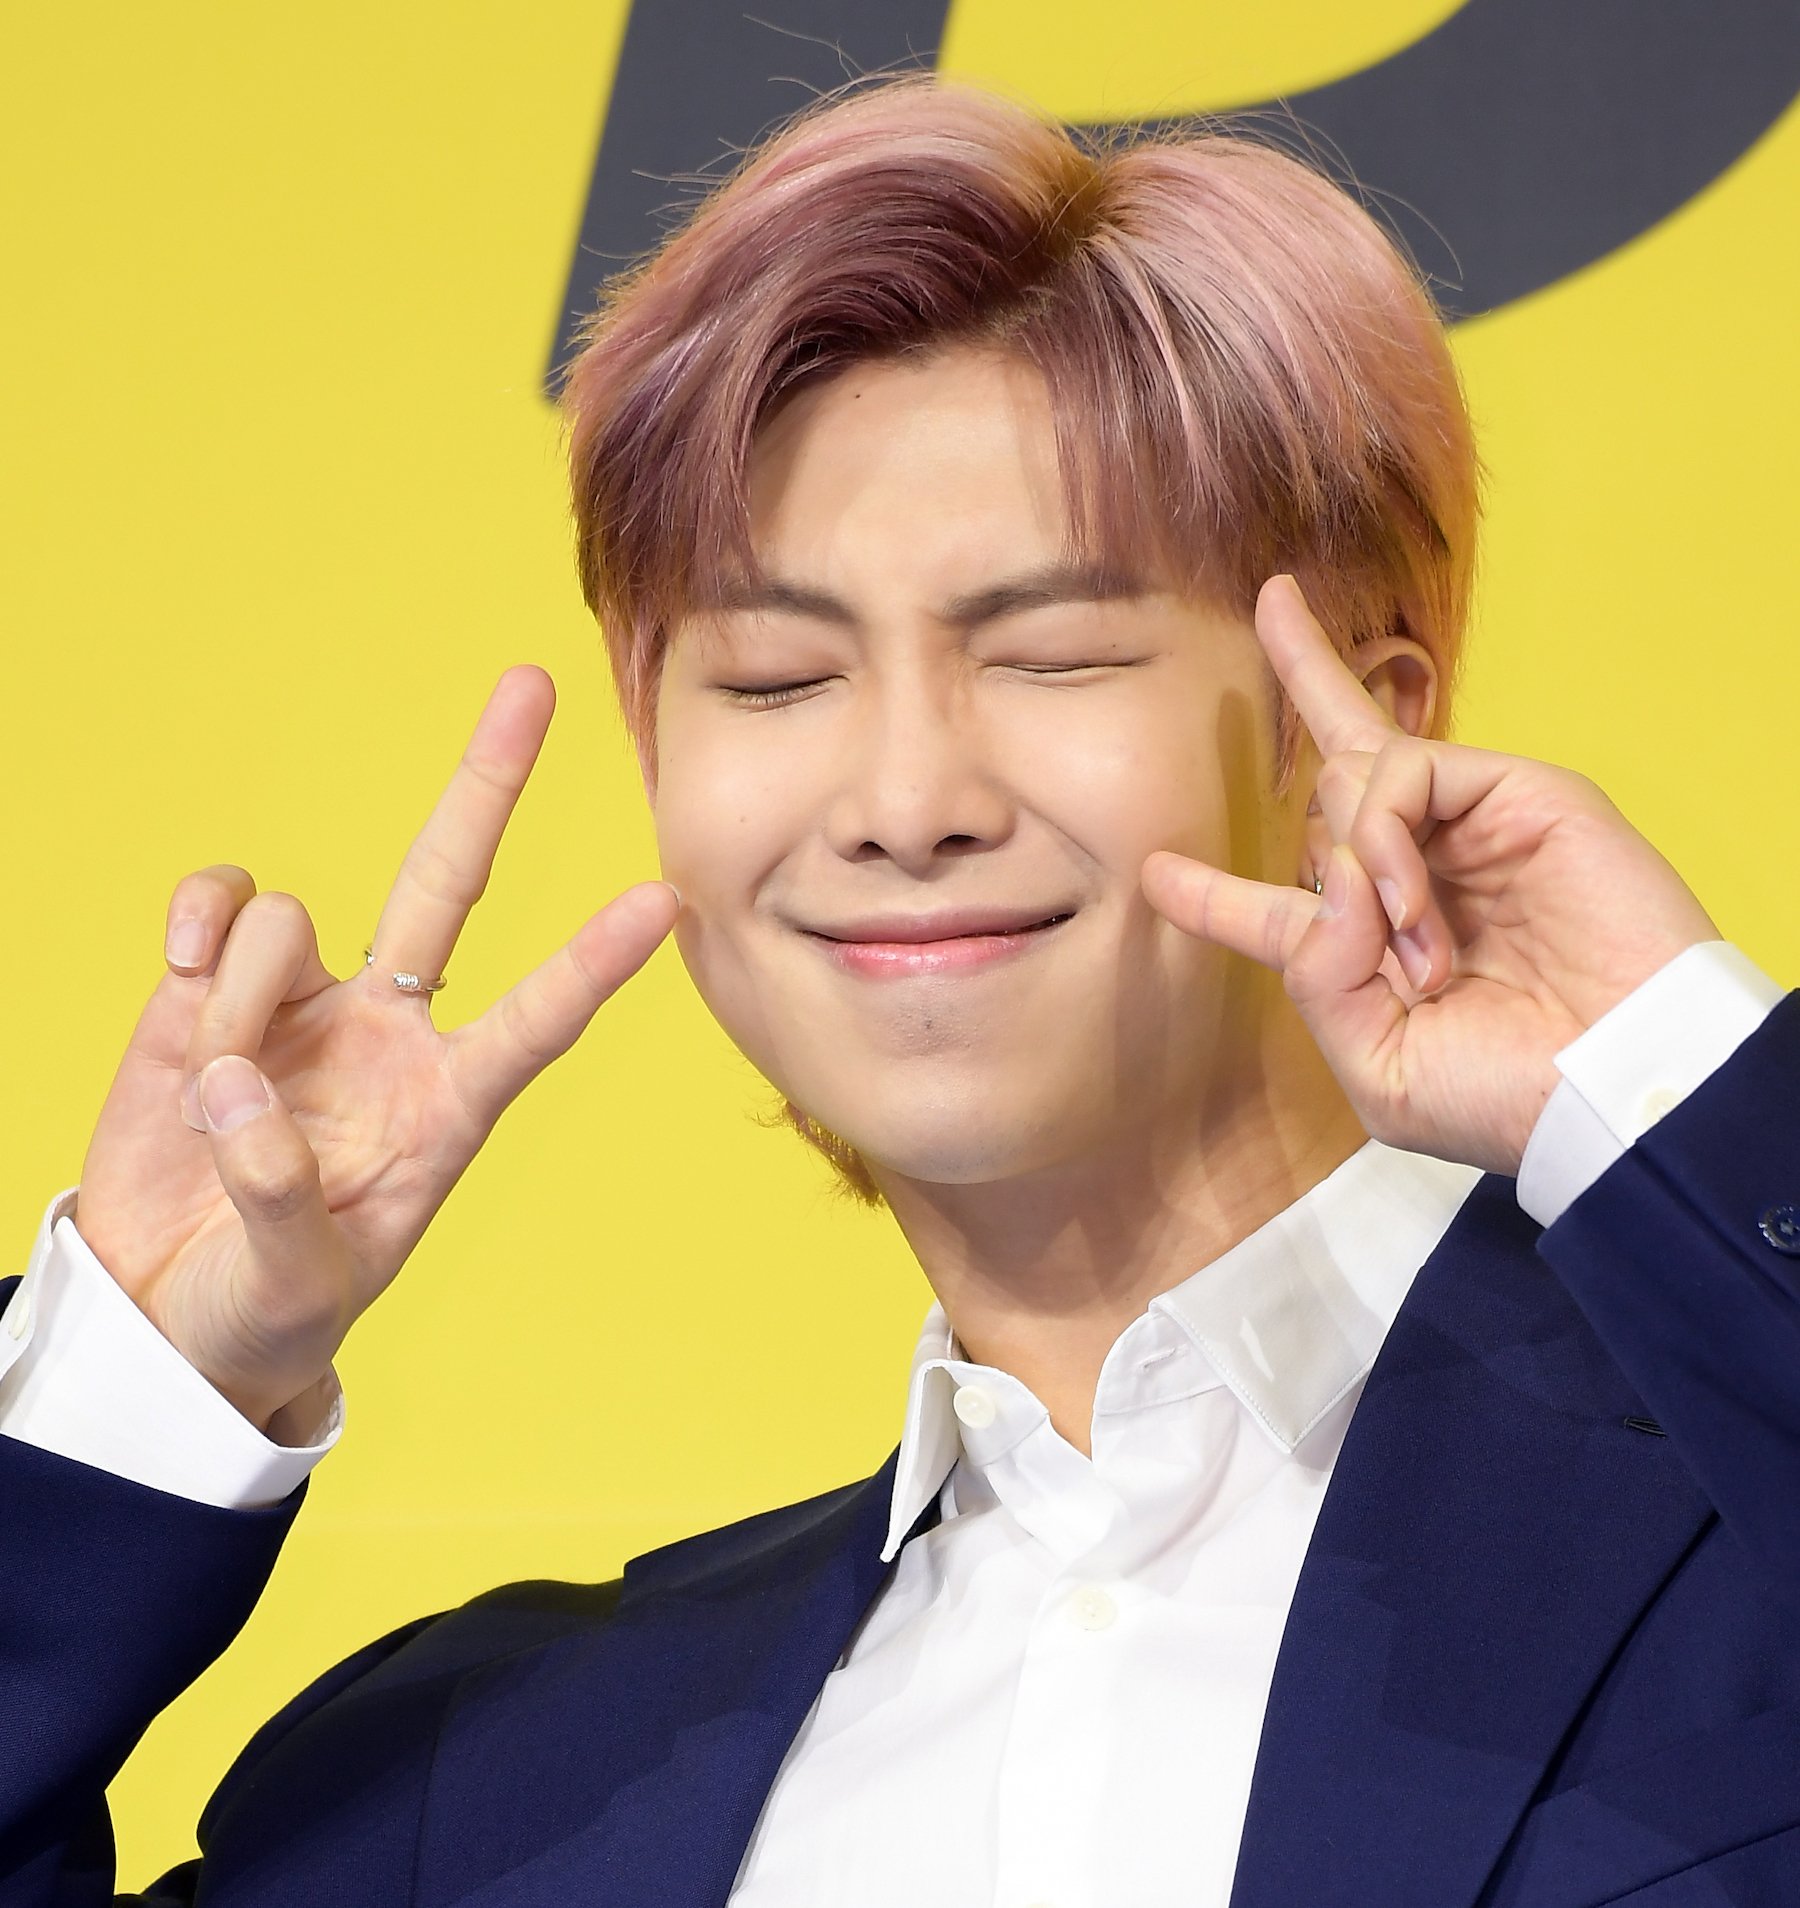 RM of BTS attends a press conference for BTS's new digital single 'Butter', with pink hair throwing up peace signs